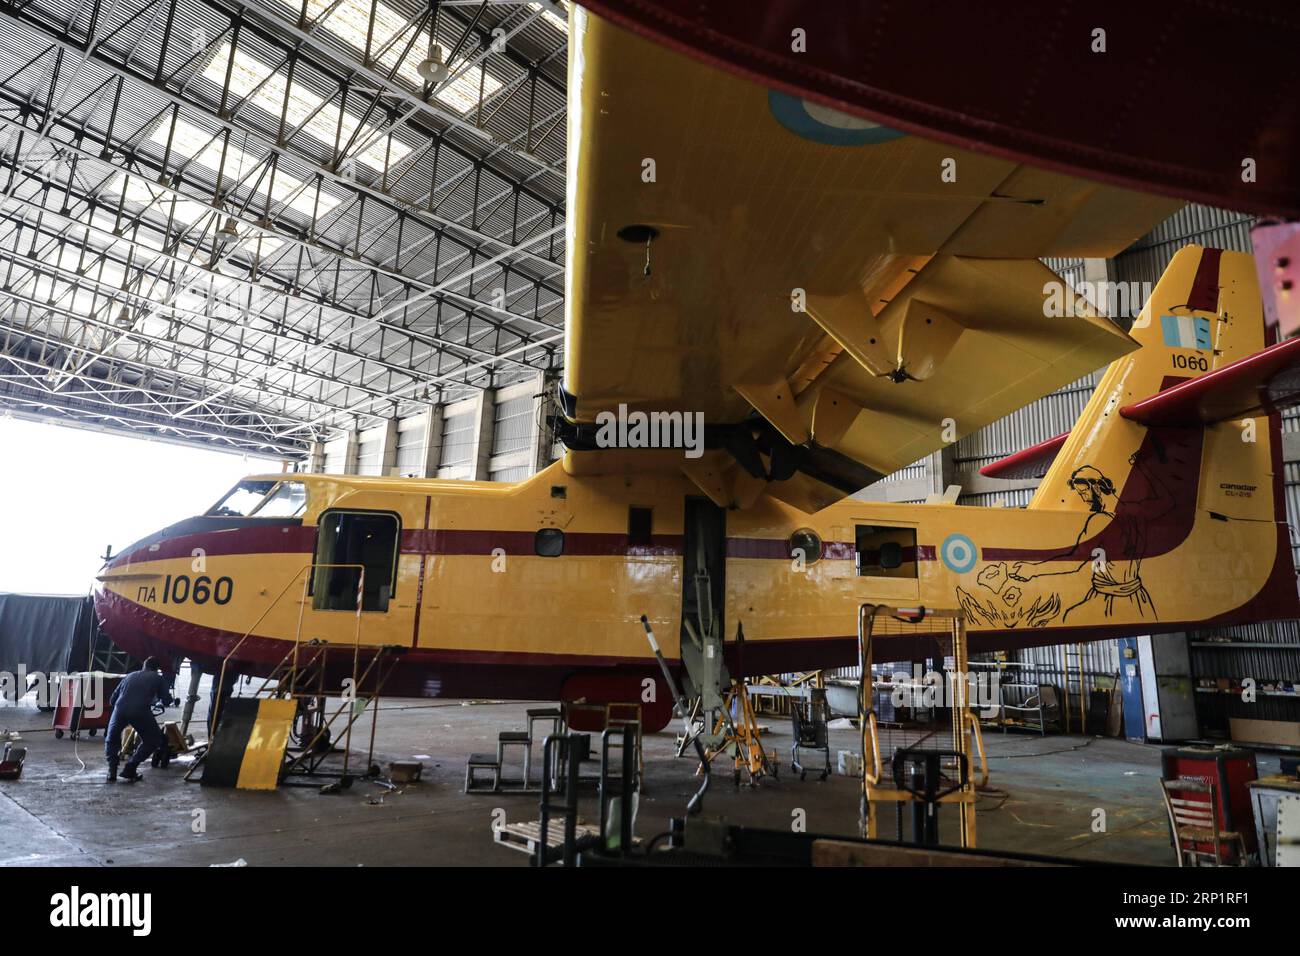 (180721) -- ATHENS, July 21, 2018 -- Engineers of Canadair firefighting aircraft fix an aircraft at Elefsina Air Base, Athens, Greece, on July 20, 2018. The 355 Tactical Transport Squadron was established in 1947 to fight wildfires. ) (zcc) GREECE-ATHENS-FIREFIGHTING SQUADRON LefterisxPartsalis PUBLICATIONxNOTxINxCHN Stock Photo